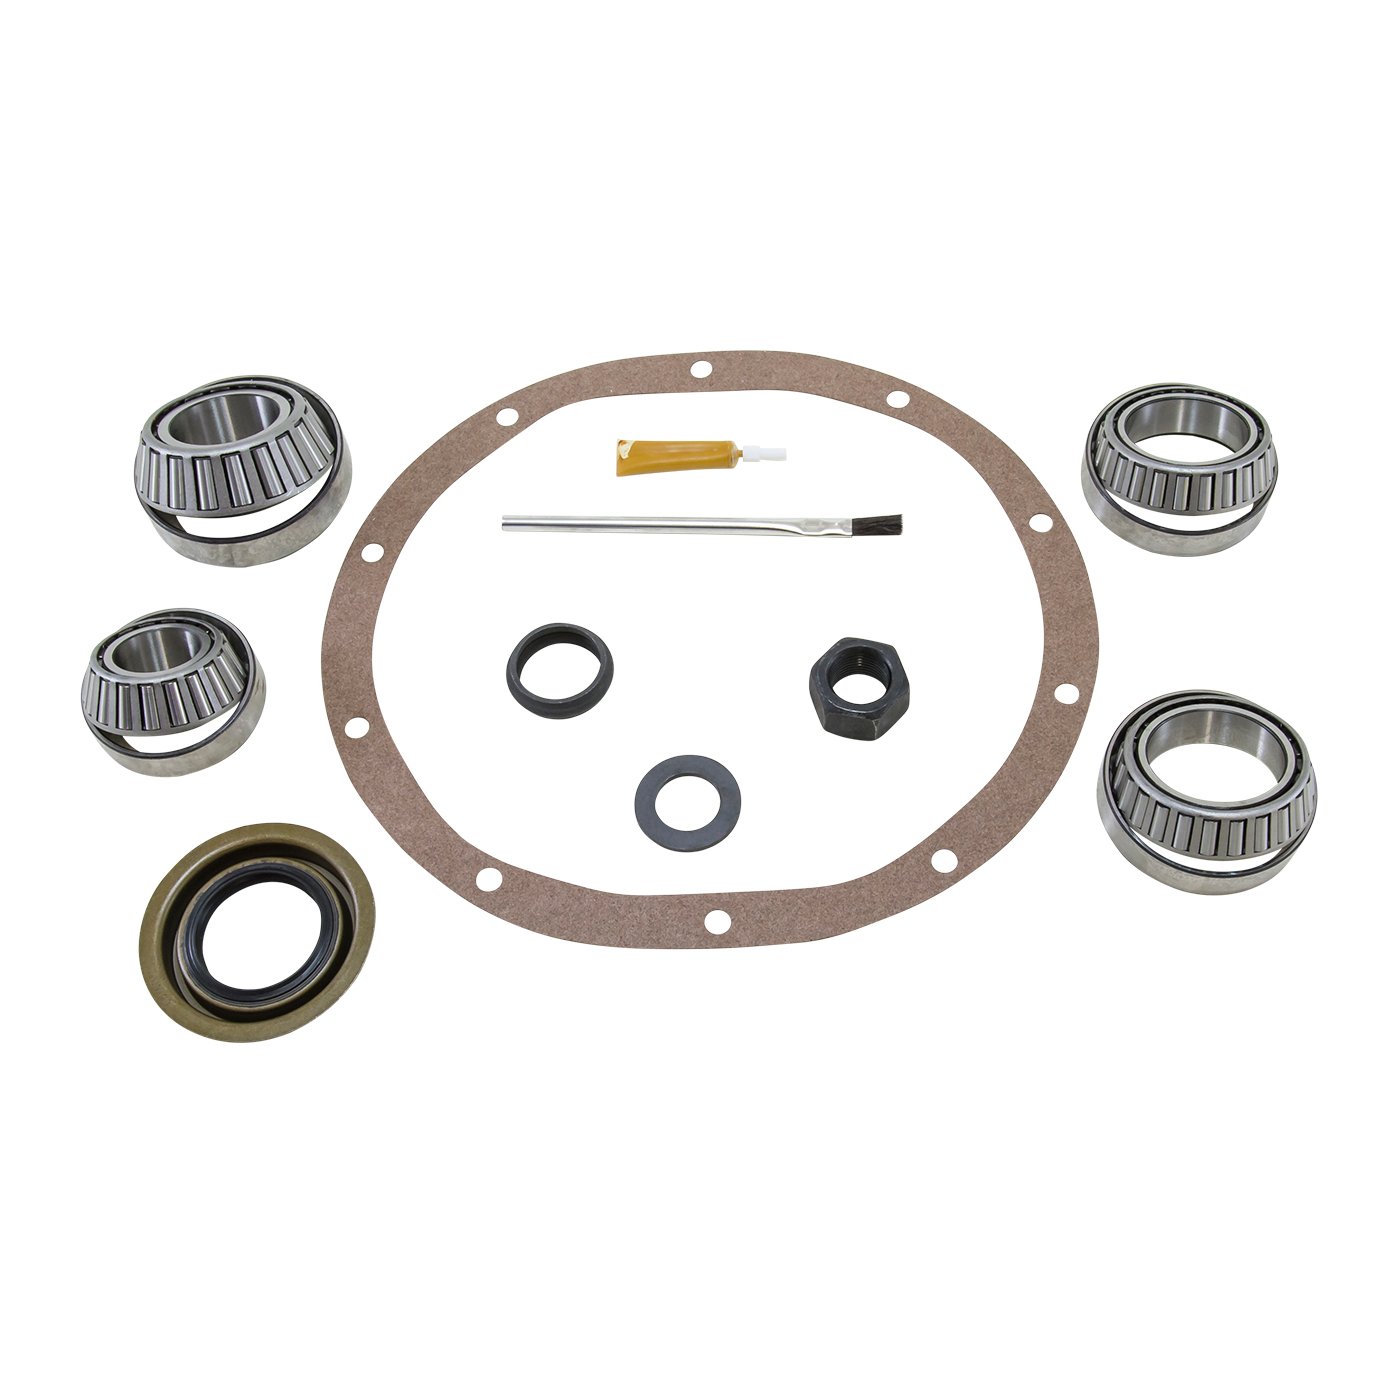 Rear Bearing Installation Kit For Chrysler 7.25" Differential Includes: